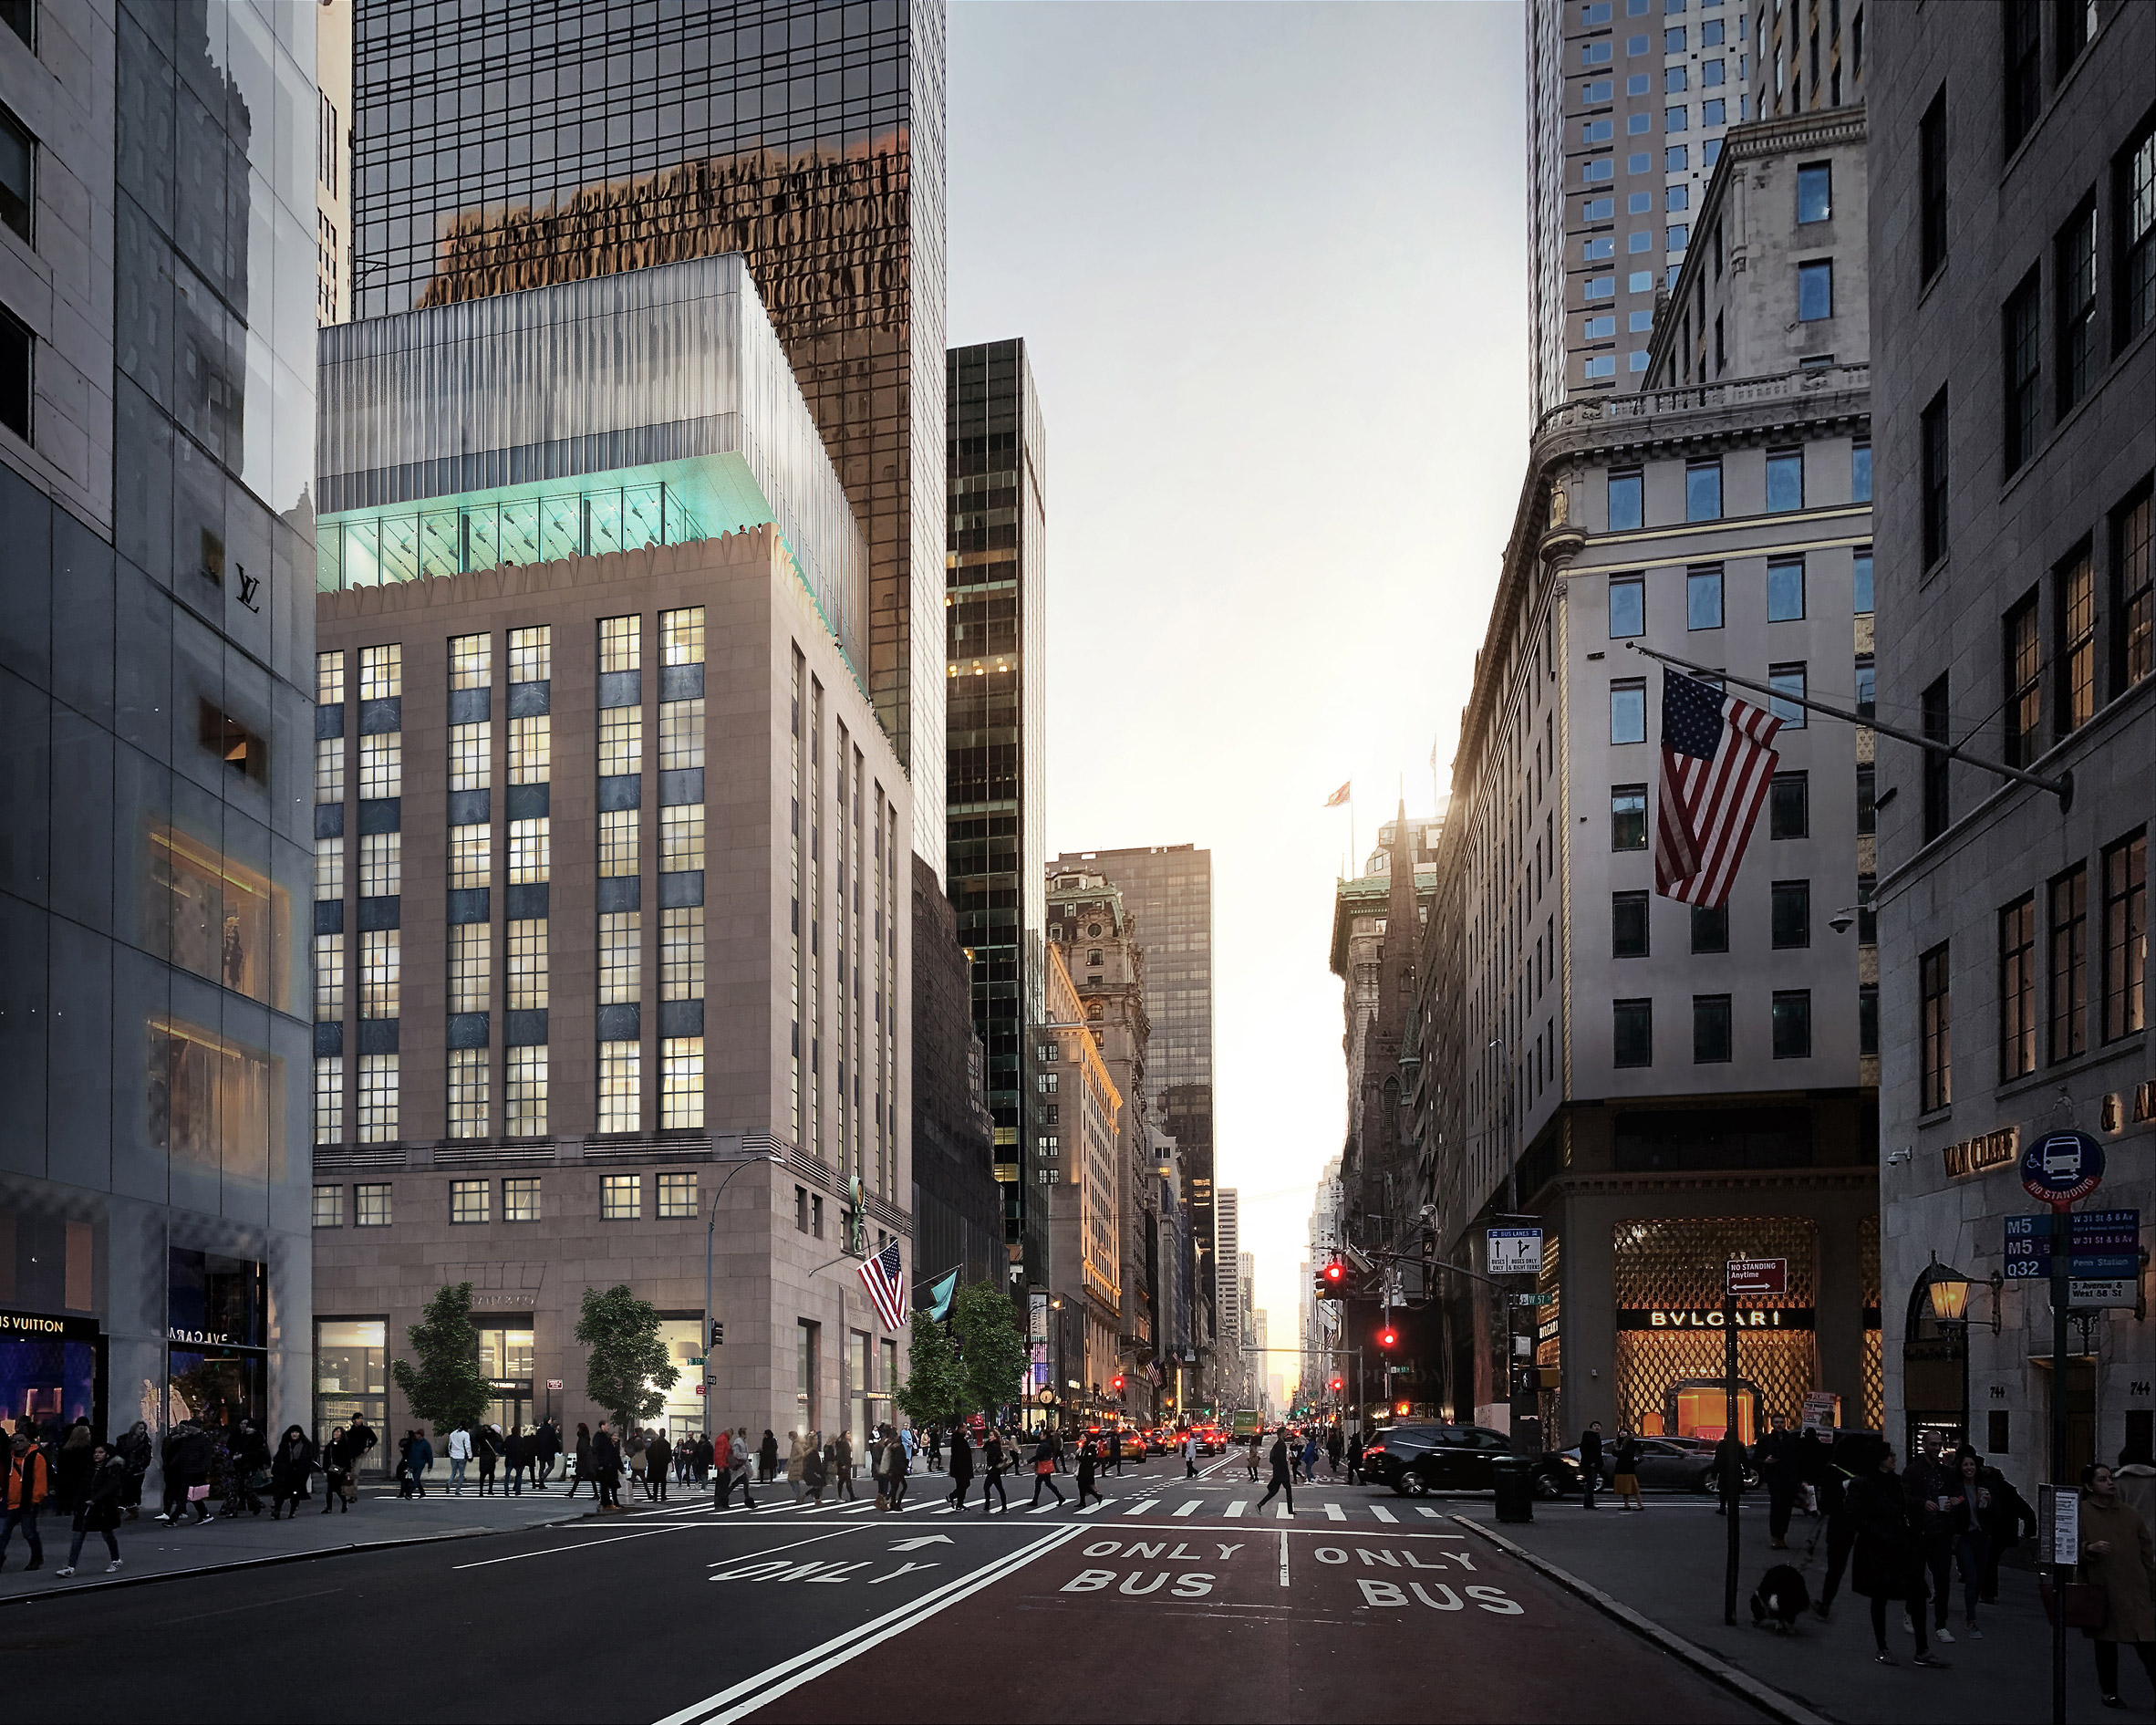 Saks Fifth Avenue Owner Unveils Plan for Casino at NYC Store - The